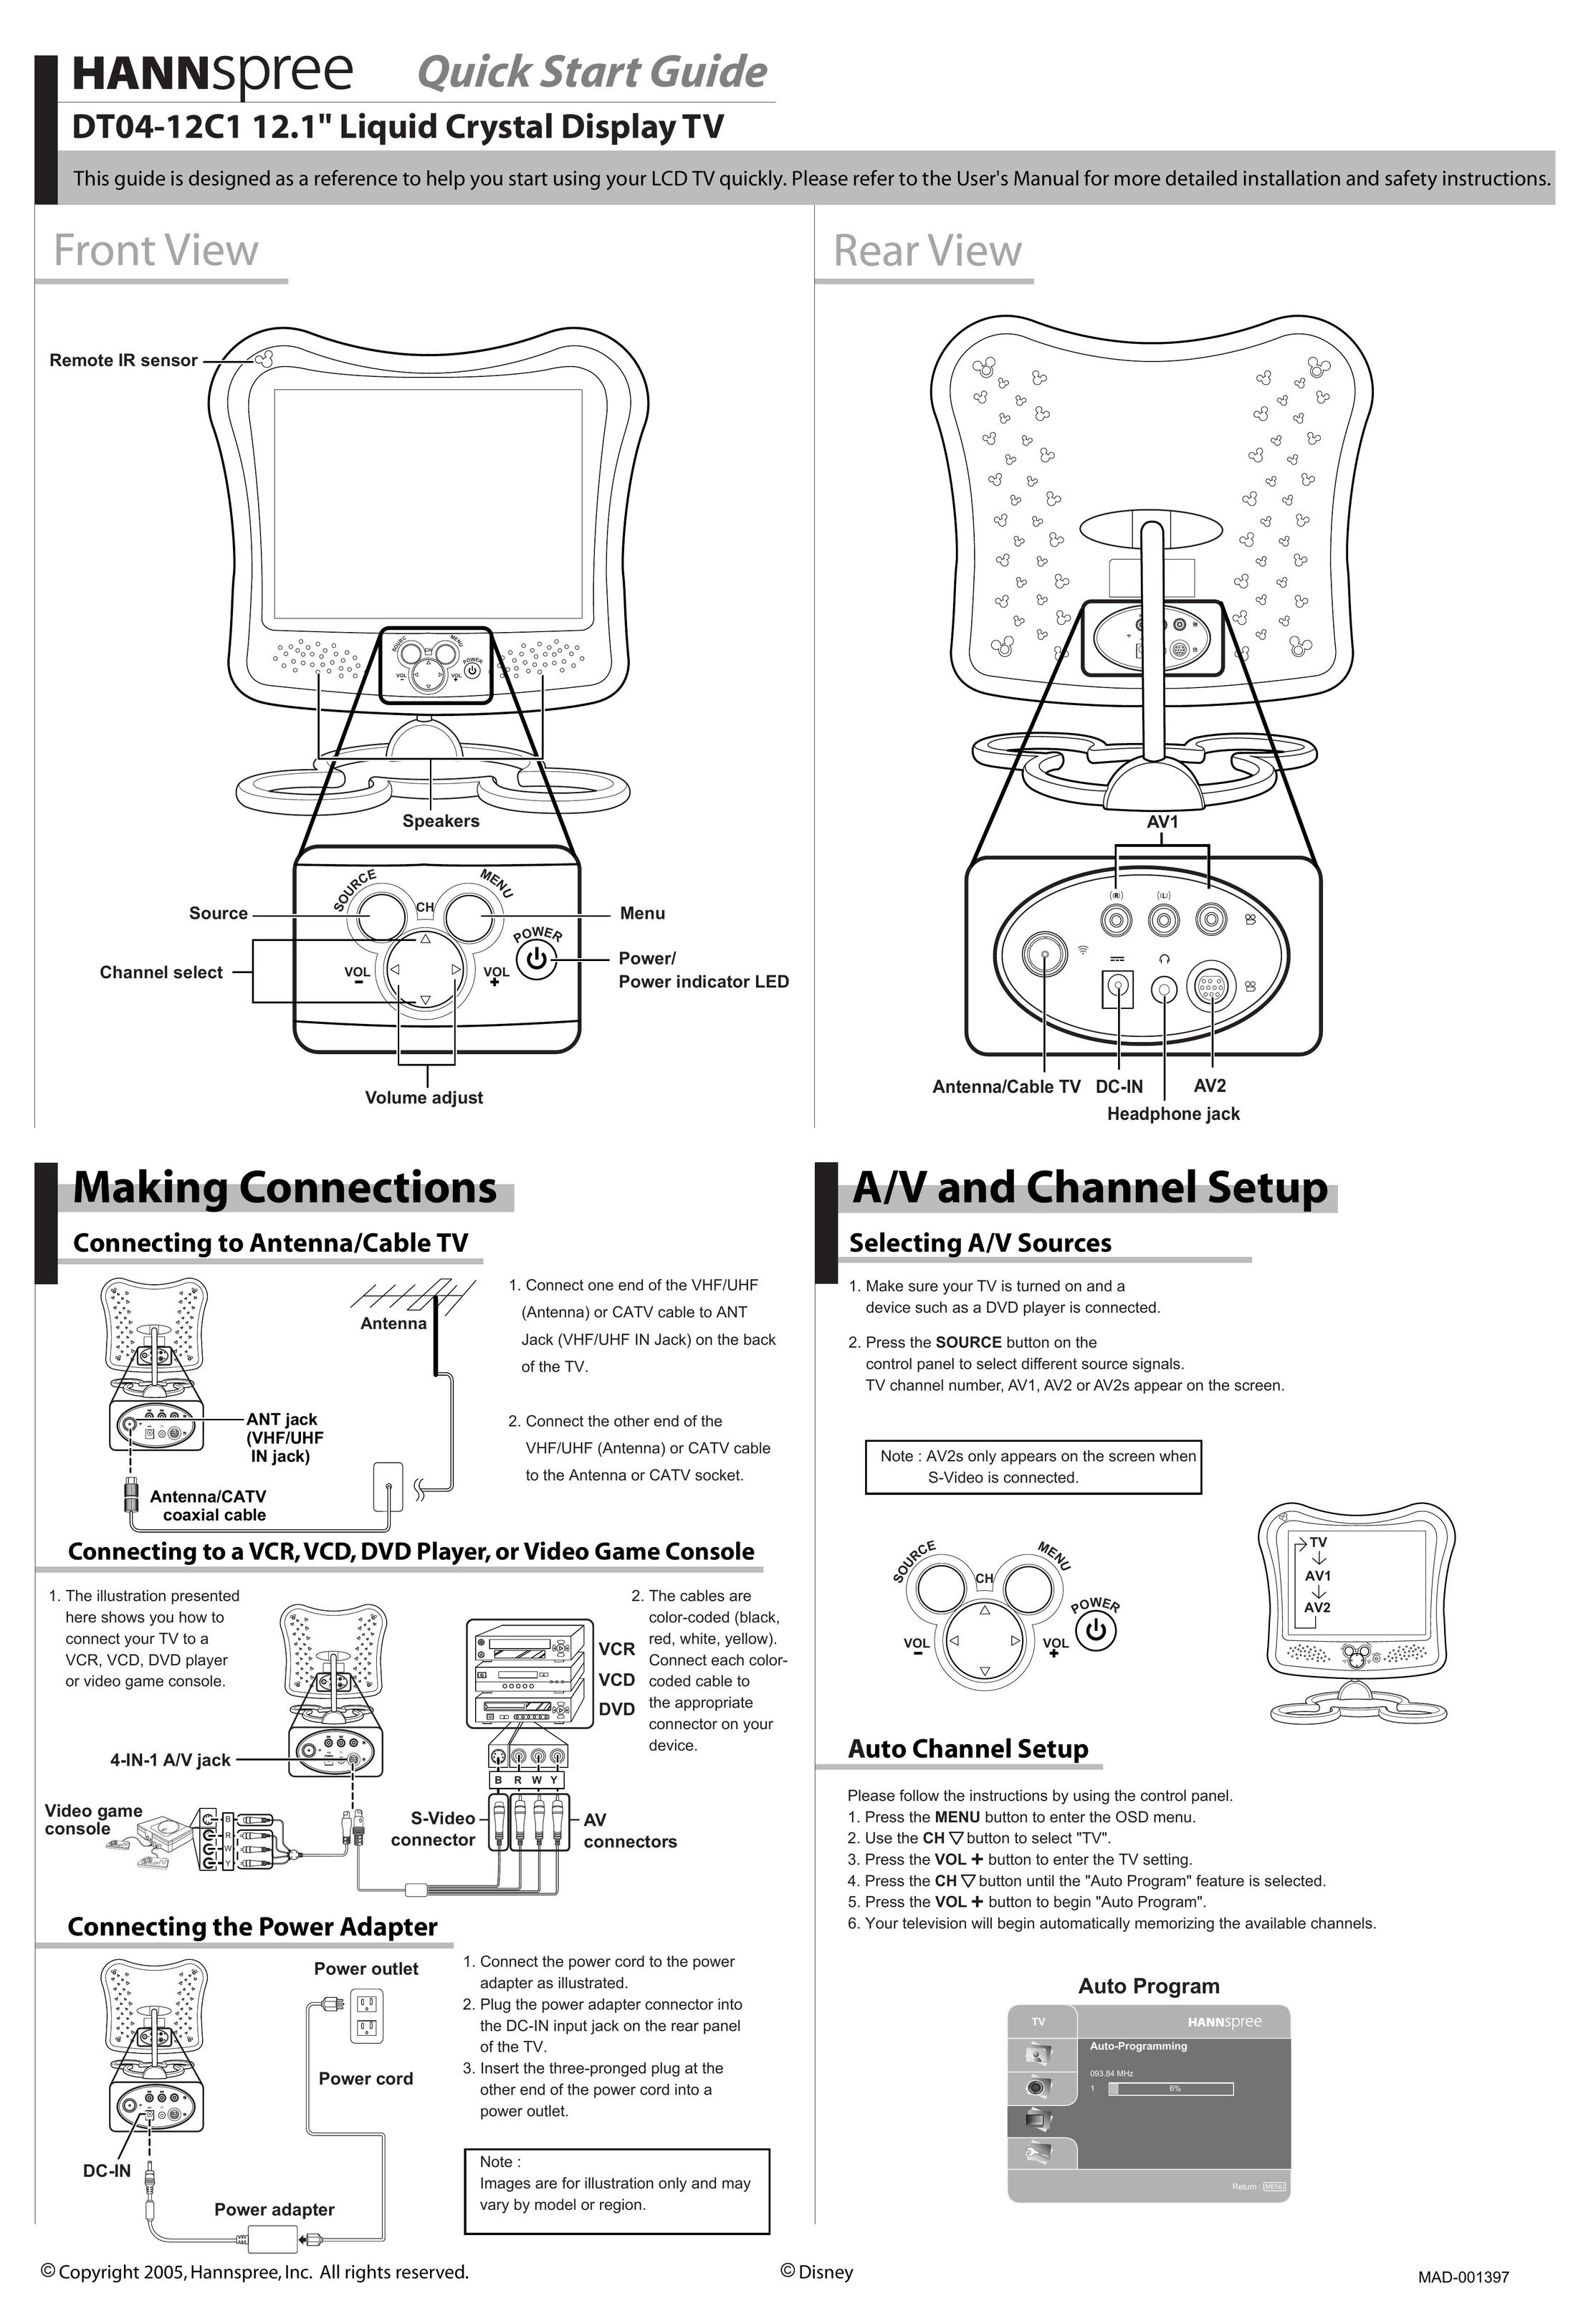 HANNspree DT04-12C1 Flat Panel Television User Manual